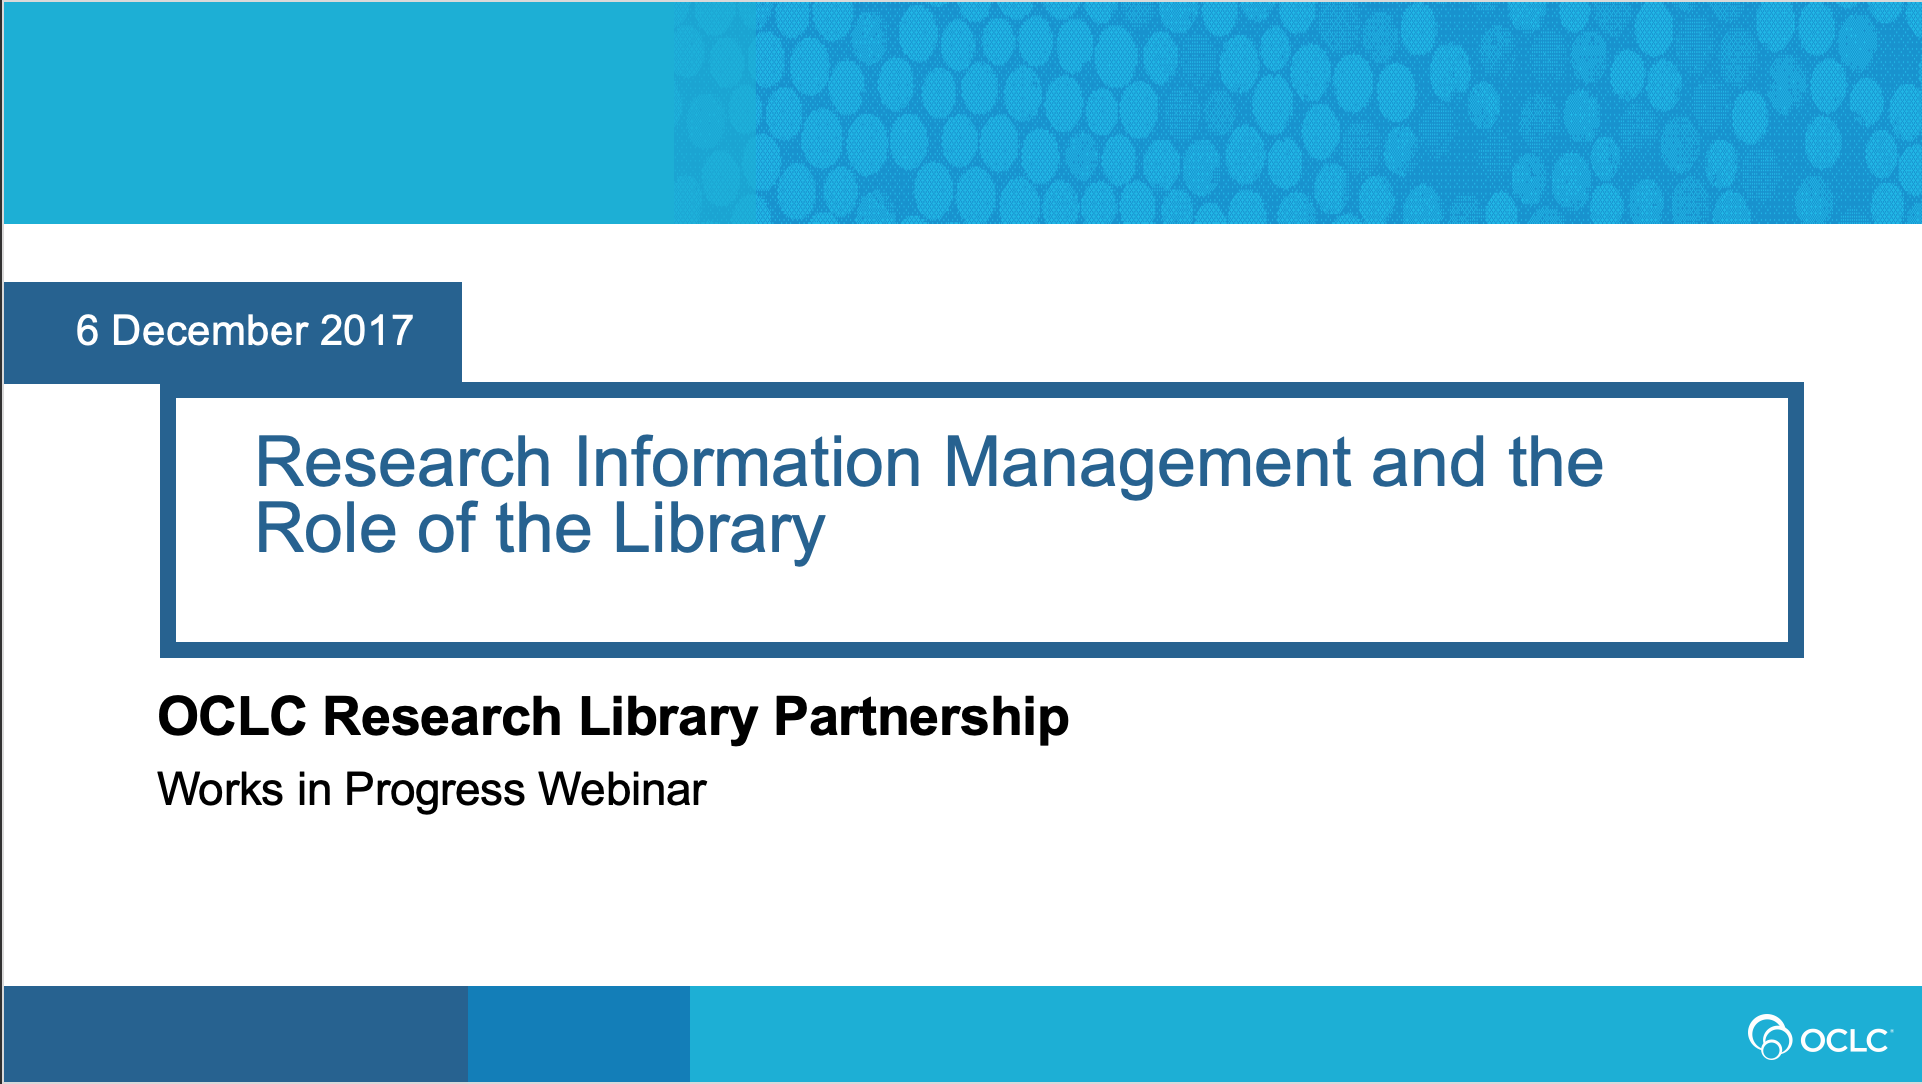 Research Information Management and the Role of the Library